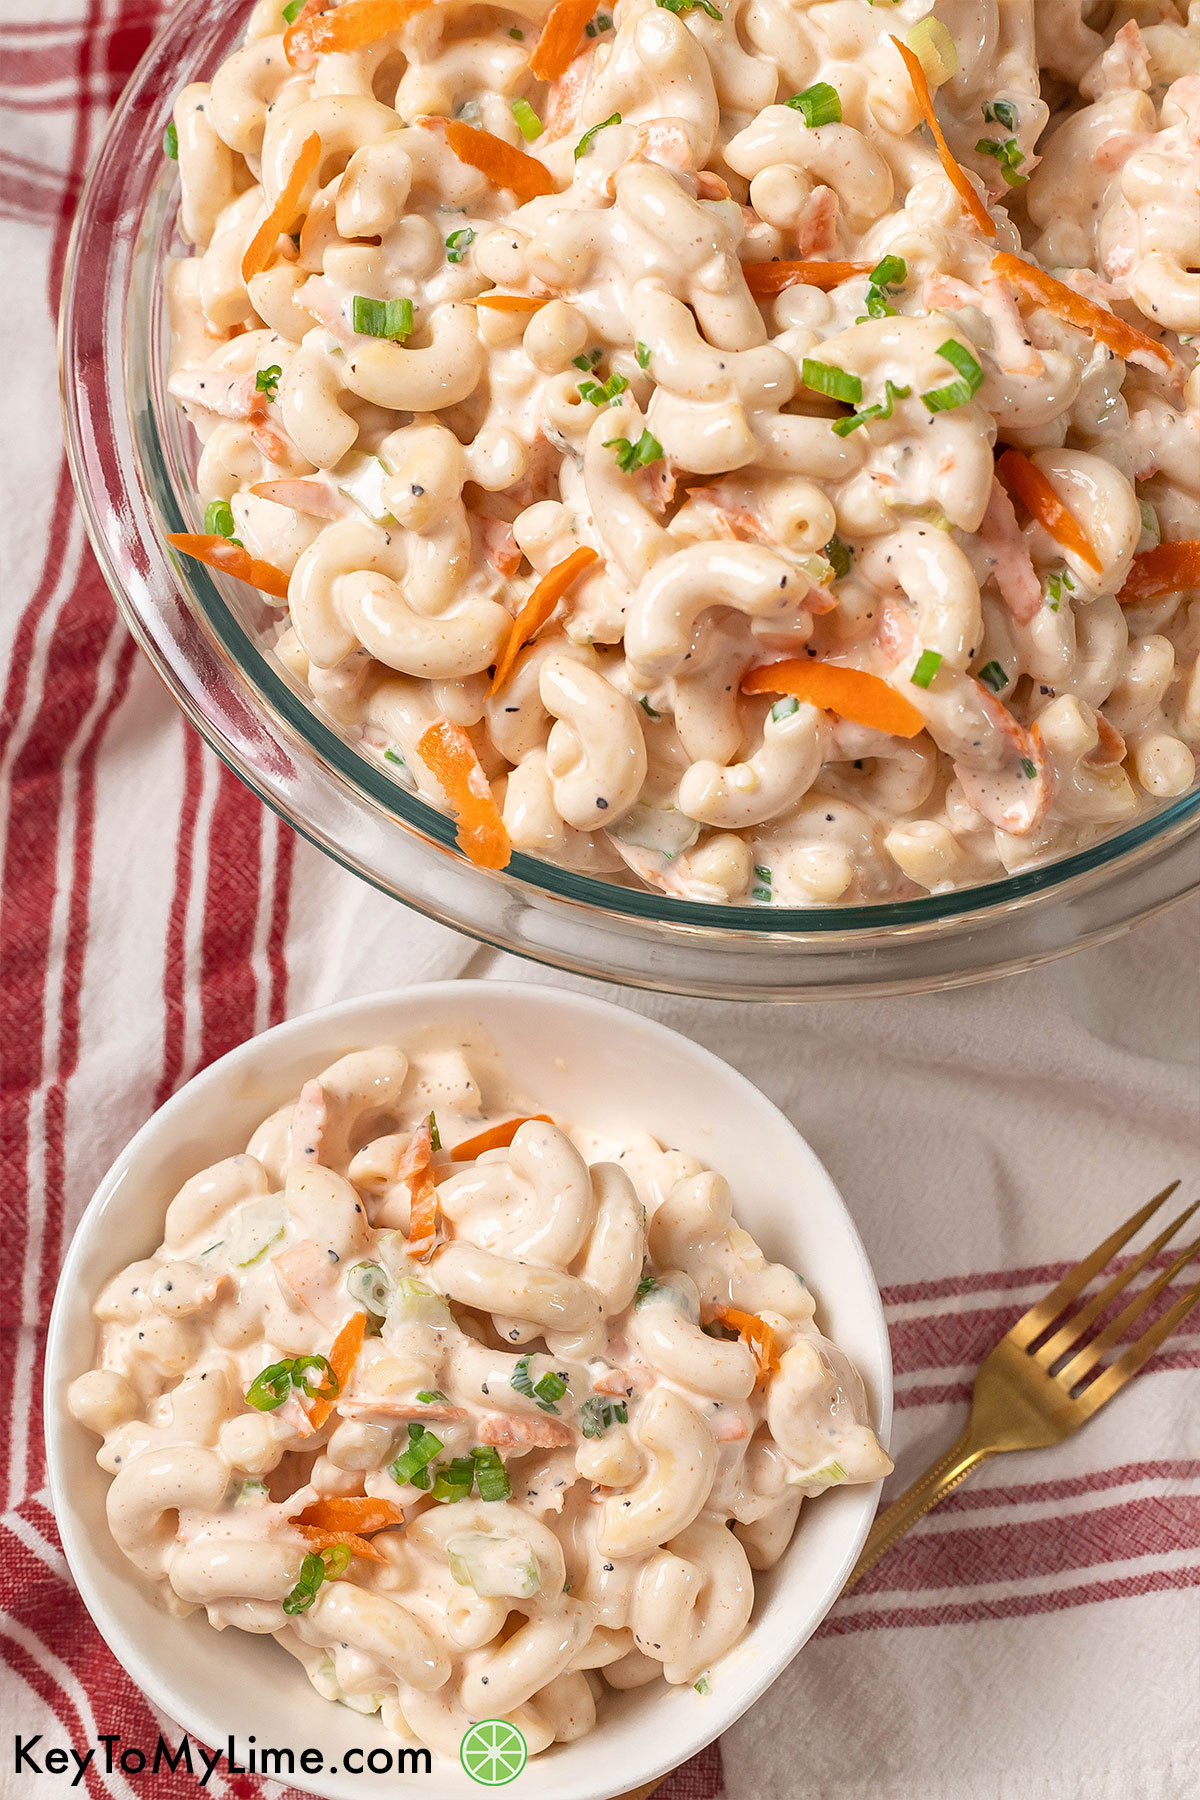 An overhead image of a large bowl of macaroni salad next to a small serving of a macaroni salad.